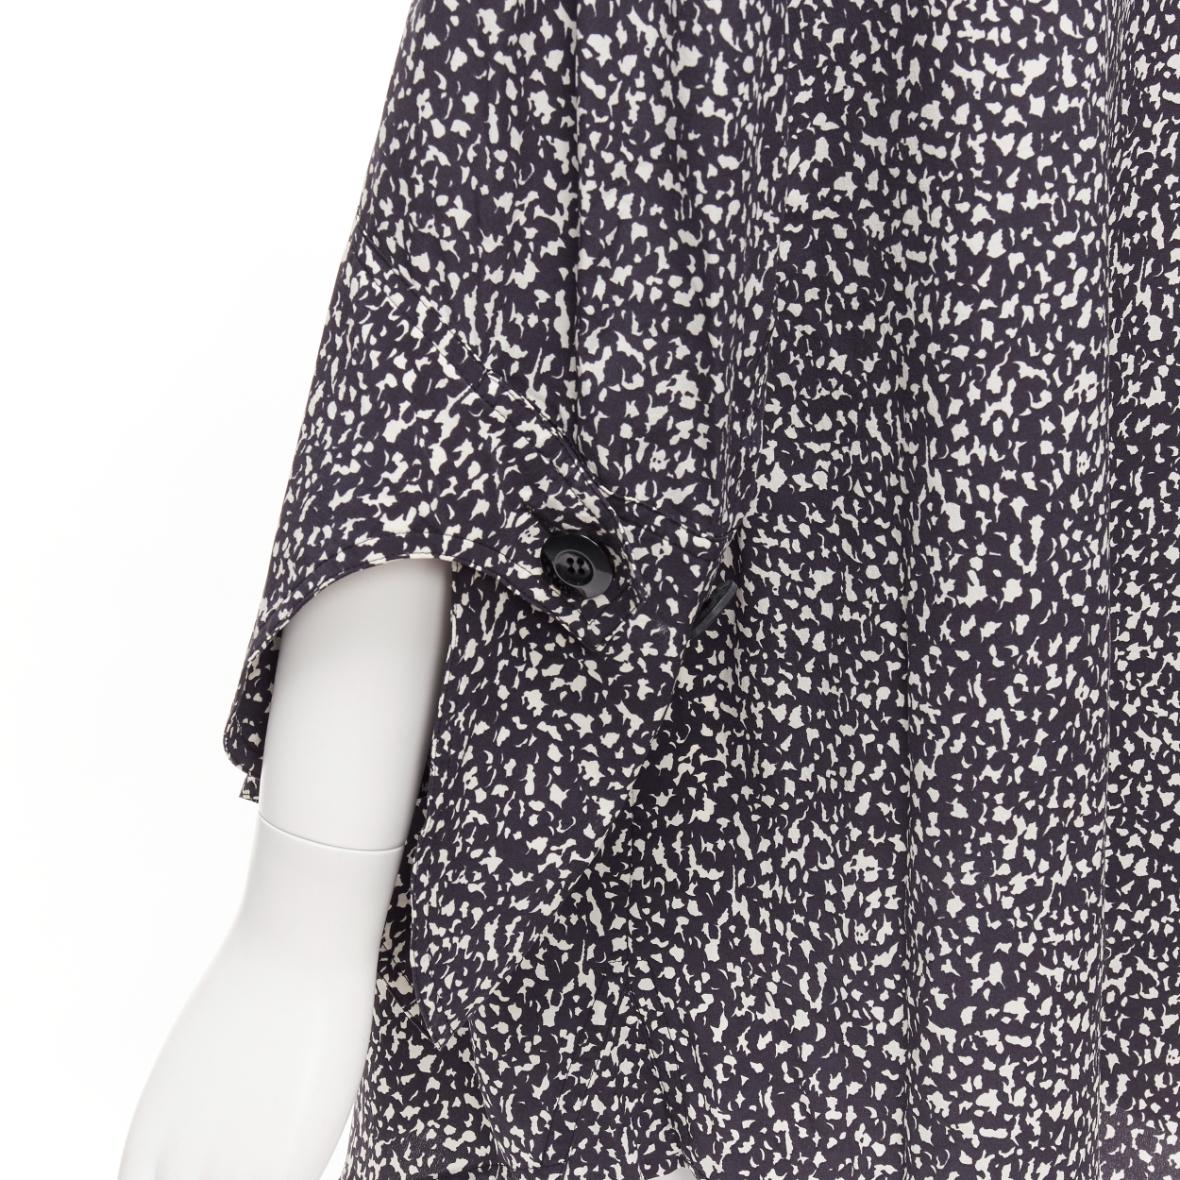 MARNI 100% silk black white speckle print asymmetric neck shirt dress IT40 S In Excellent Condition For Sale In Hong Kong, NT